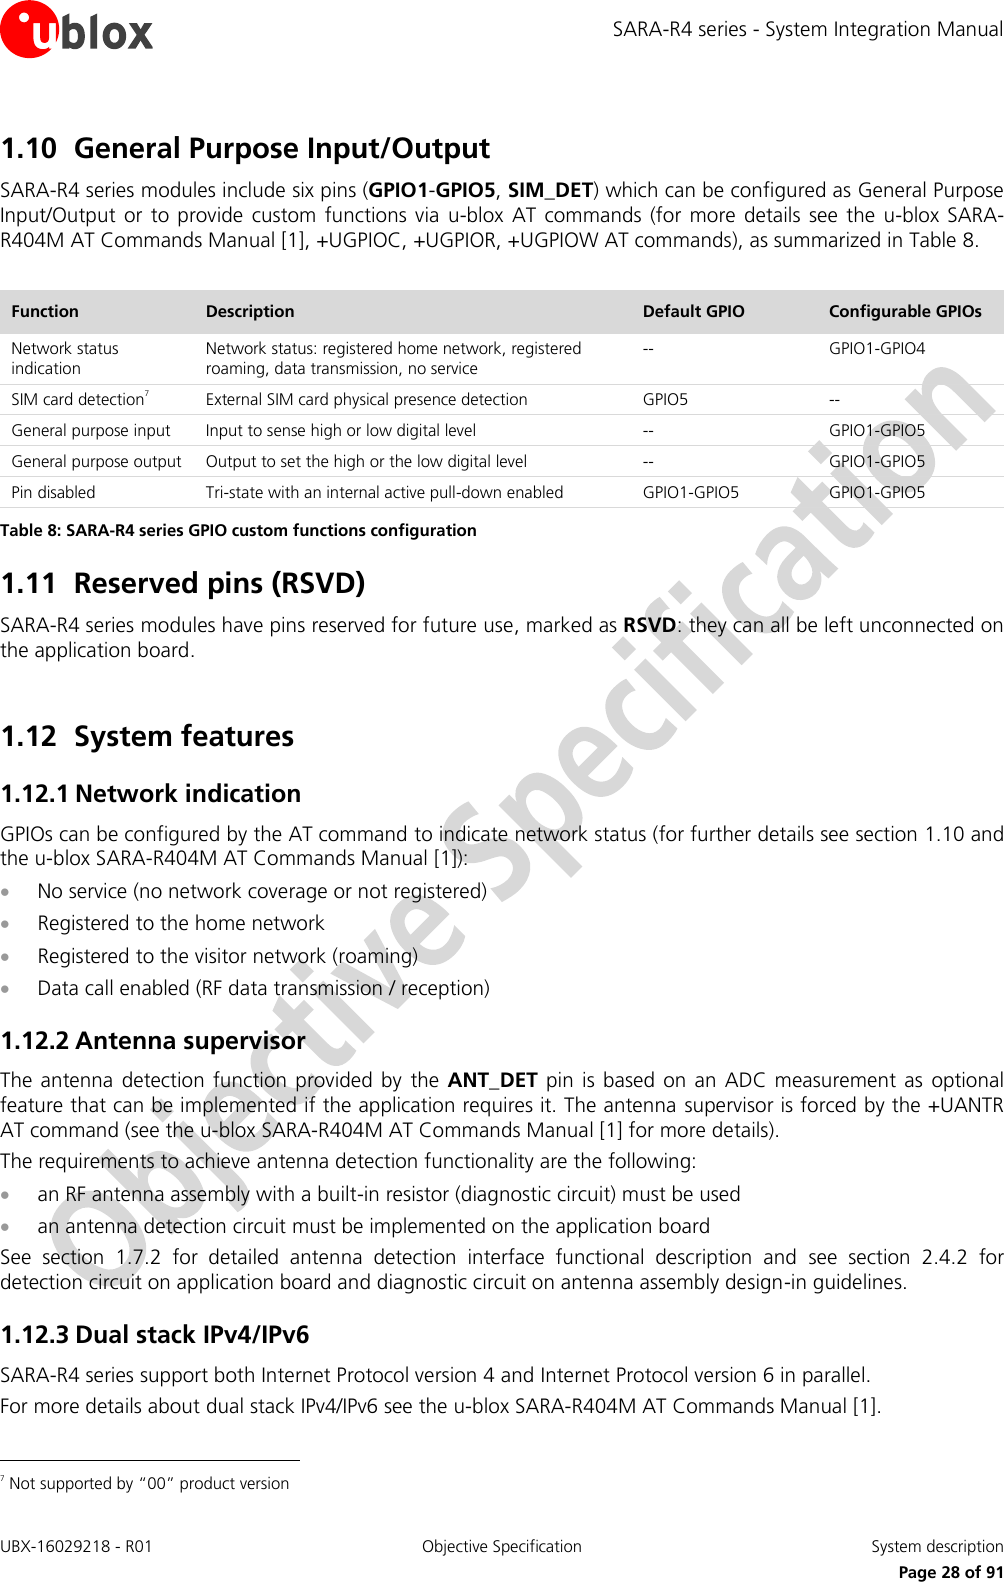 SARA-R4 series - System Integration Manual UBX-16029218 - R01  Objective Specification  System description     Page 28 of 91 1.10 General Purpose Input/Output SARA-R4 series modules include six pins (GPIO1-GPIO5, SIM_DET) which can be configured as General Purpose Input/Output  or  to  provide  custom  functions via  u-blox  AT commands  (for more  details  see the  u-blox SARA-R404M AT Commands Manual [1], +UGPIOC, +UGPIOR, +UGPIOW AT commands), as summarized in Table 8.  Function Description Default GPIO Configurable GPIOs Network status indication Network status: registered home network, registered roaming, data transmission, no service -- GPIO1-GPIO4 SIM card detection7 External SIM card physical presence detection  GPIO5 -- General purpose input Input to sense high or low digital level -- GPIO1-GPIO5 General purpose output Output to set the high or the low digital level -- GPIO1-GPIO5 Pin disabled Tri-state with an internal active pull-down enabled GPIO1-GPIO5 GPIO1-GPIO5 Table 8: SARA-R4 series GPIO custom functions configuration 1.11 Reserved pins (RSVD) SARA-R4 series modules have pins reserved for future use, marked as RSVD: they can all be left unconnected on the application board.   1.12 System features 1.12.1 Network indication GPIOs can be configured by the AT command to indicate network status (for further details see section 1.10 and the u-blox SARA-R404M AT Commands Manual [1]):  No service (no network coverage or not registered)  Registered to the home network  Registered to the visitor network (roaming)  Data call enabled (RF data transmission / reception) 1.12.2 Antenna supervisor The  antenna  detection  function provided  by  the ANT_DET  pin is  based  on an ADC measurement as  optional feature that can be implemented if the application requires it. The antenna  supervisor is forced by the +UANTR AT command (see the u-blox SARA-R404M AT Commands Manual [1] for more details). The requirements to achieve antenna detection functionality are the following:  an RF antenna assembly with a built-in resistor (diagnostic circuit) must be used  an antenna detection circuit must be implemented on the application board See  section  1.7.2  for  detailed  antenna  detection  interface  functional  description  and  see  section  2.4.2  for detection circuit on application board and diagnostic circuit on antenna assembly design-in guidelines. 1.12.3 Dual stack IPv4/IPv6 SARA-R4 series support both Internet Protocol version 4 and Internet Protocol version 6 in parallel. For more details about dual stack IPv4/IPv6 see the u-blox SARA-R404M AT Commands Manual [1].                                                       7 Not supported by “00” product version 